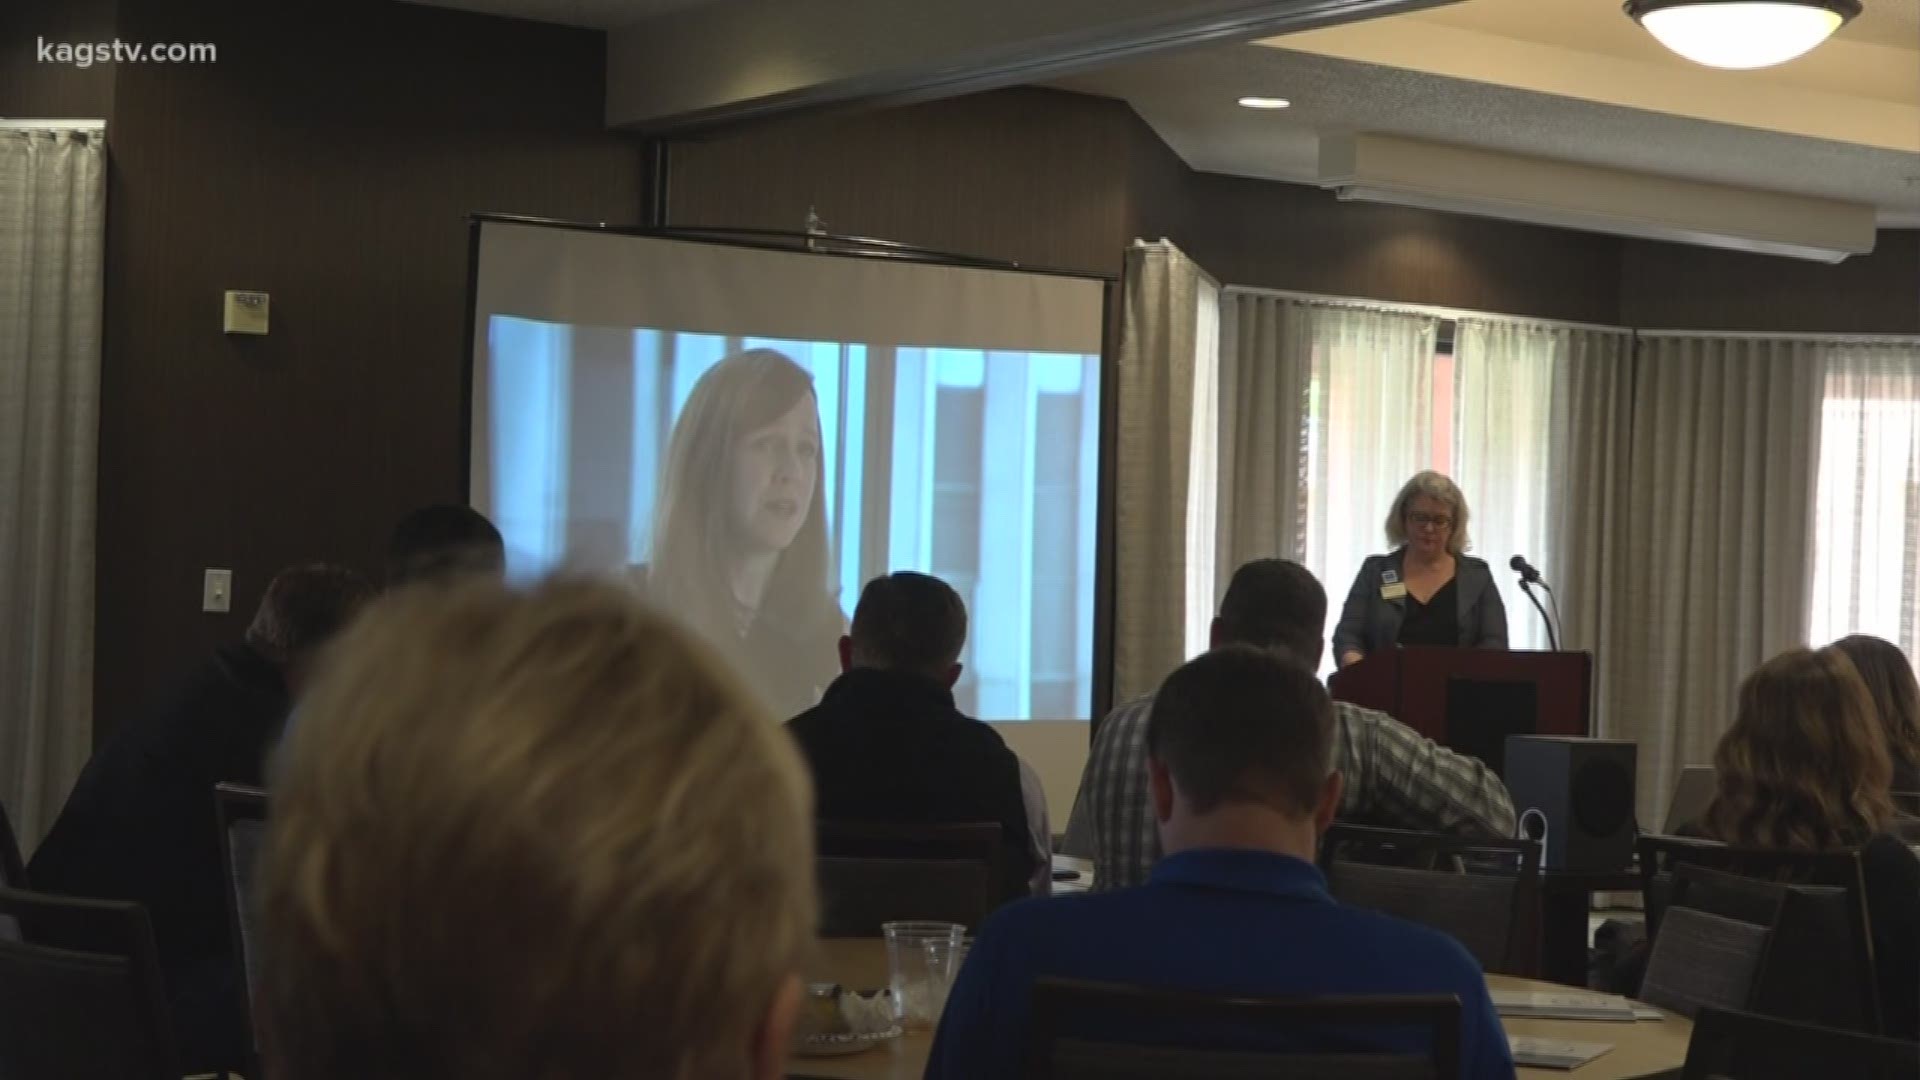 The group of more than 30 gathered at the Bryan-College Station Courtyard Marriott to learn what sex trafficking looks like and how it operates in hotels.